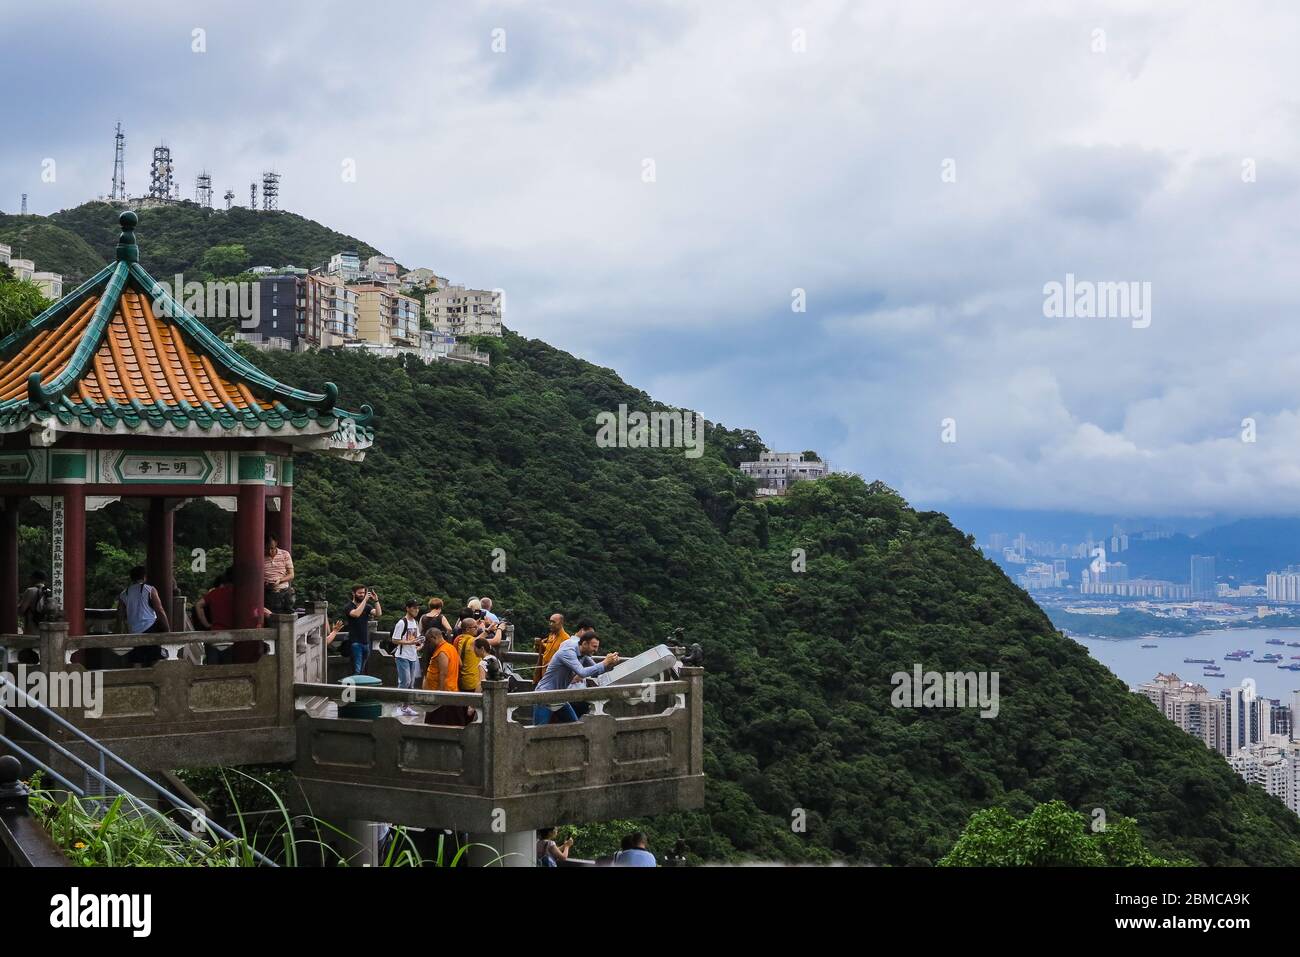 A crowd of tourists in a pagoda taking in the view of Victoria Peak, Hong Kong Stock Photo